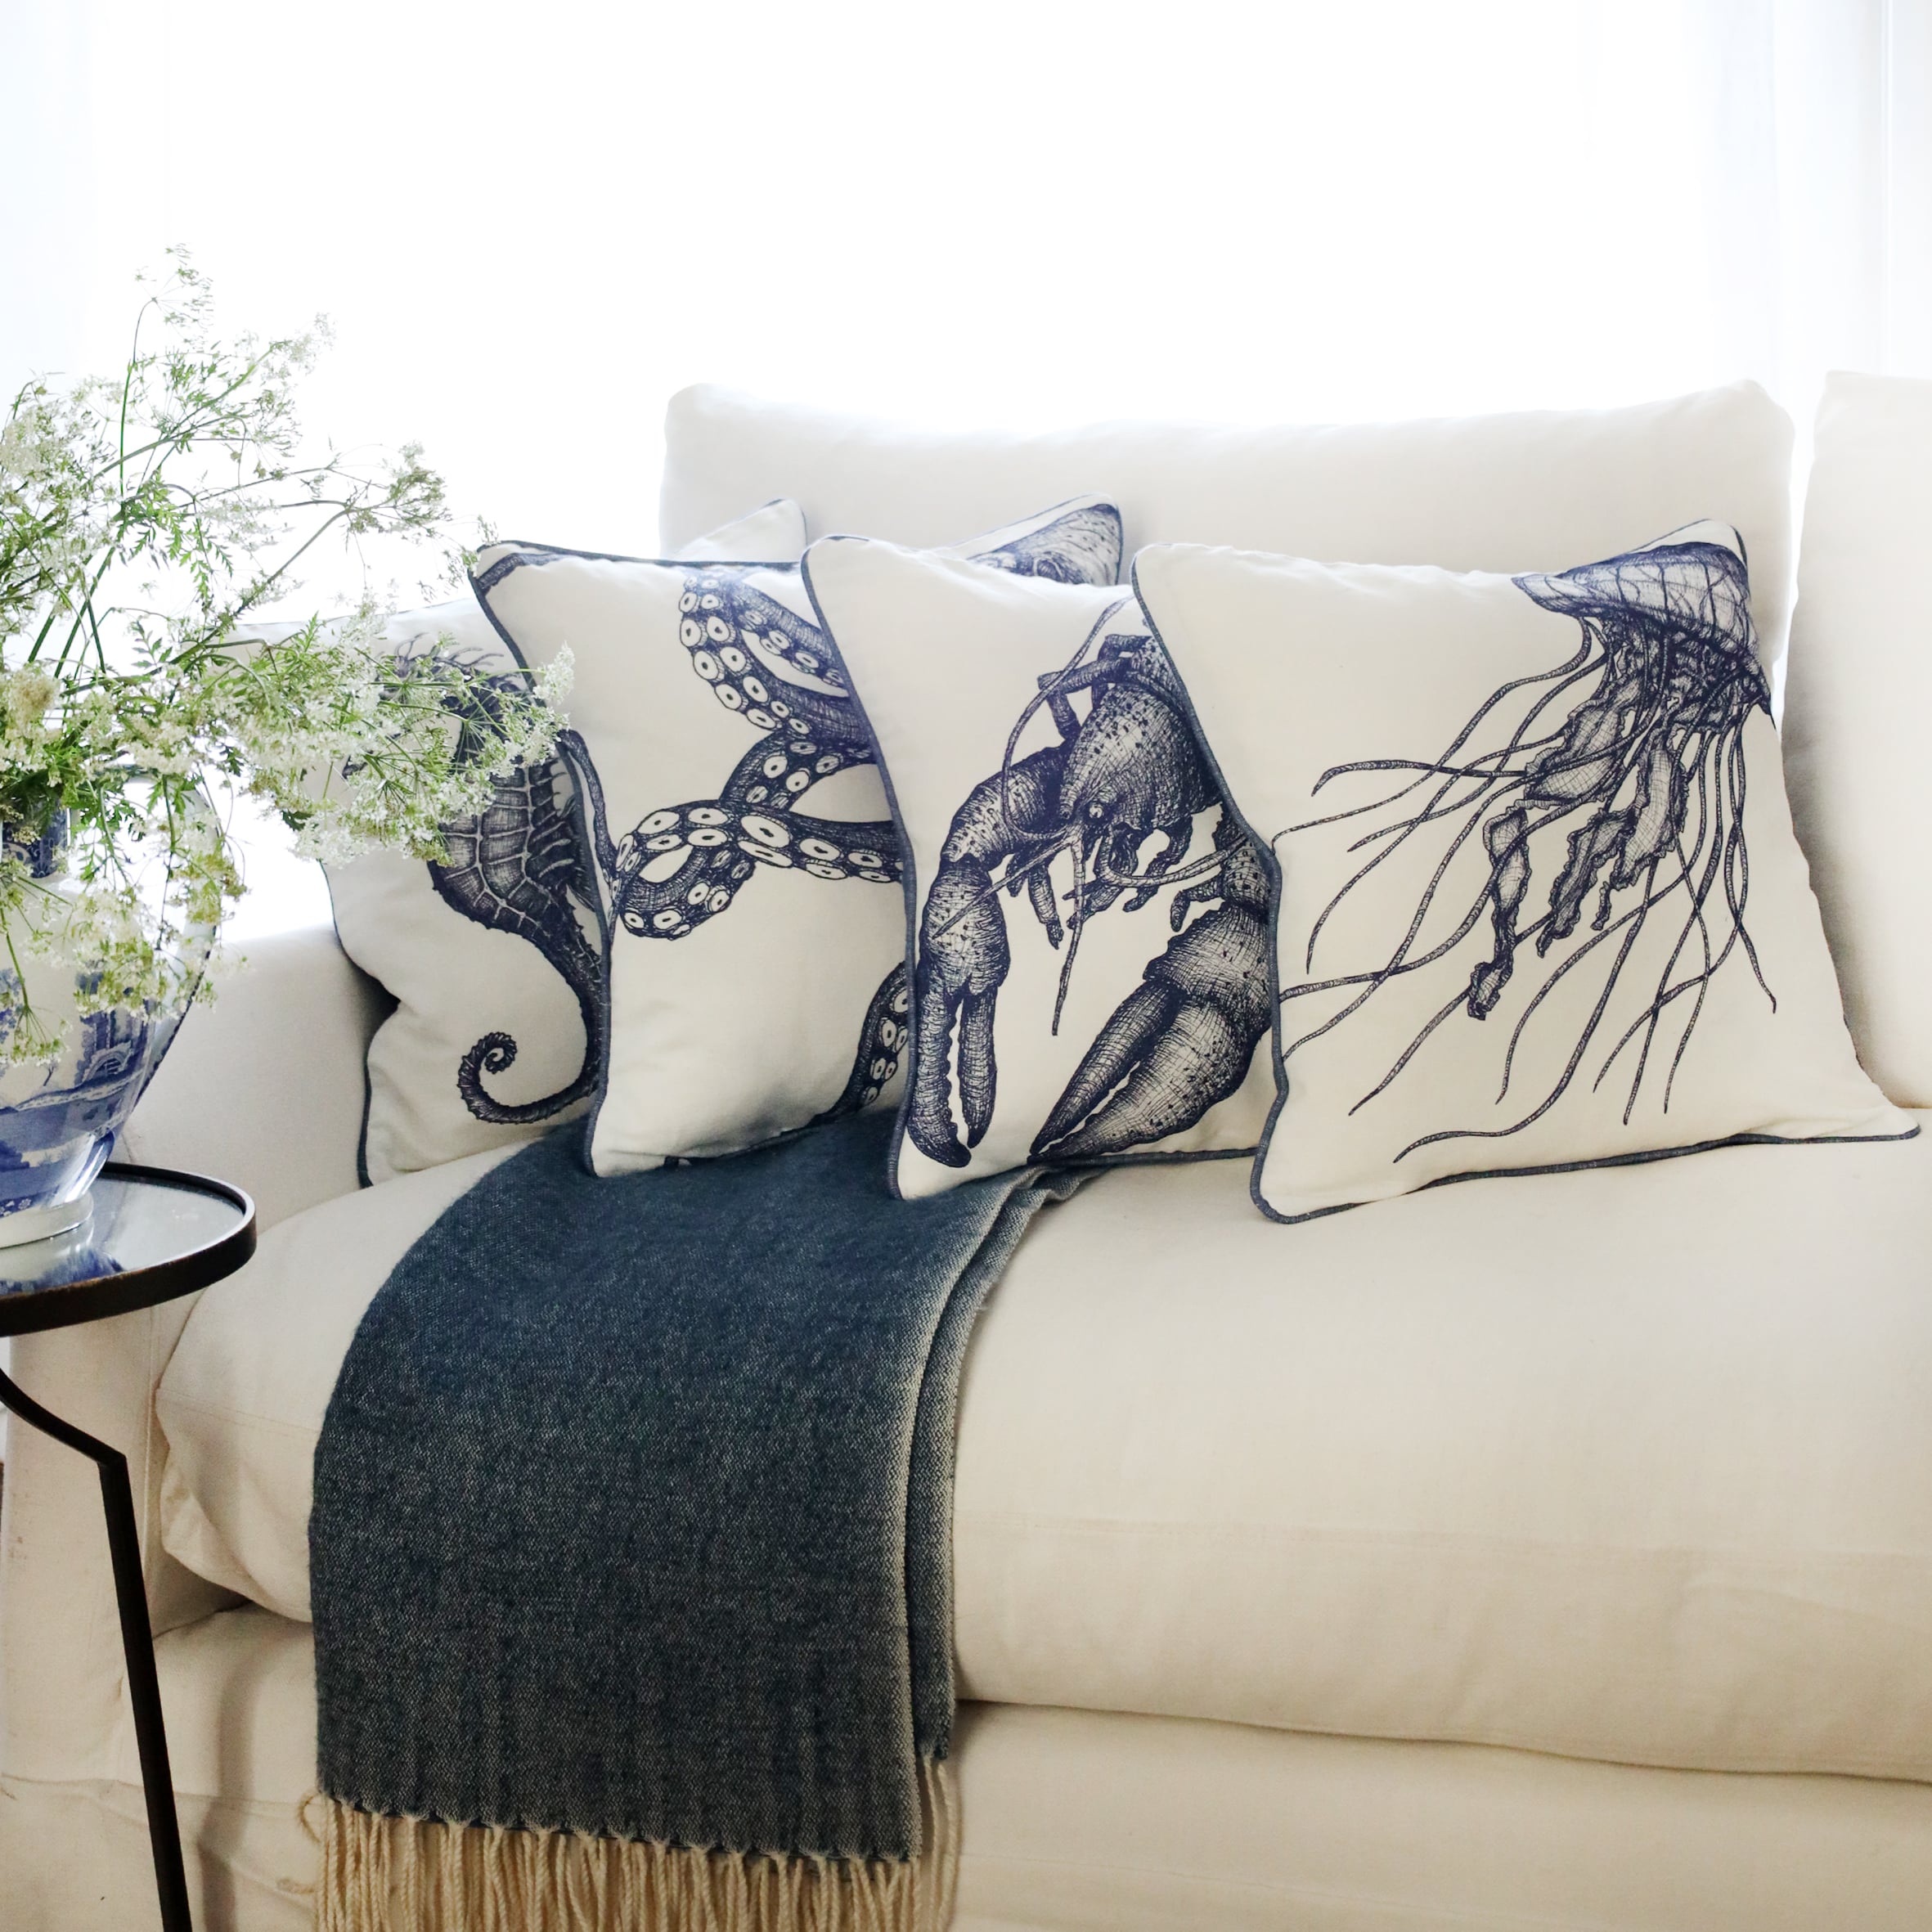 row of 4 blue & white illustrated sea creature cushions with a jellyfish cushion at the front, sitting on a navy throw on a white sofa with bright sunlight window behind and a large willow pattern jug filled with cow parsley